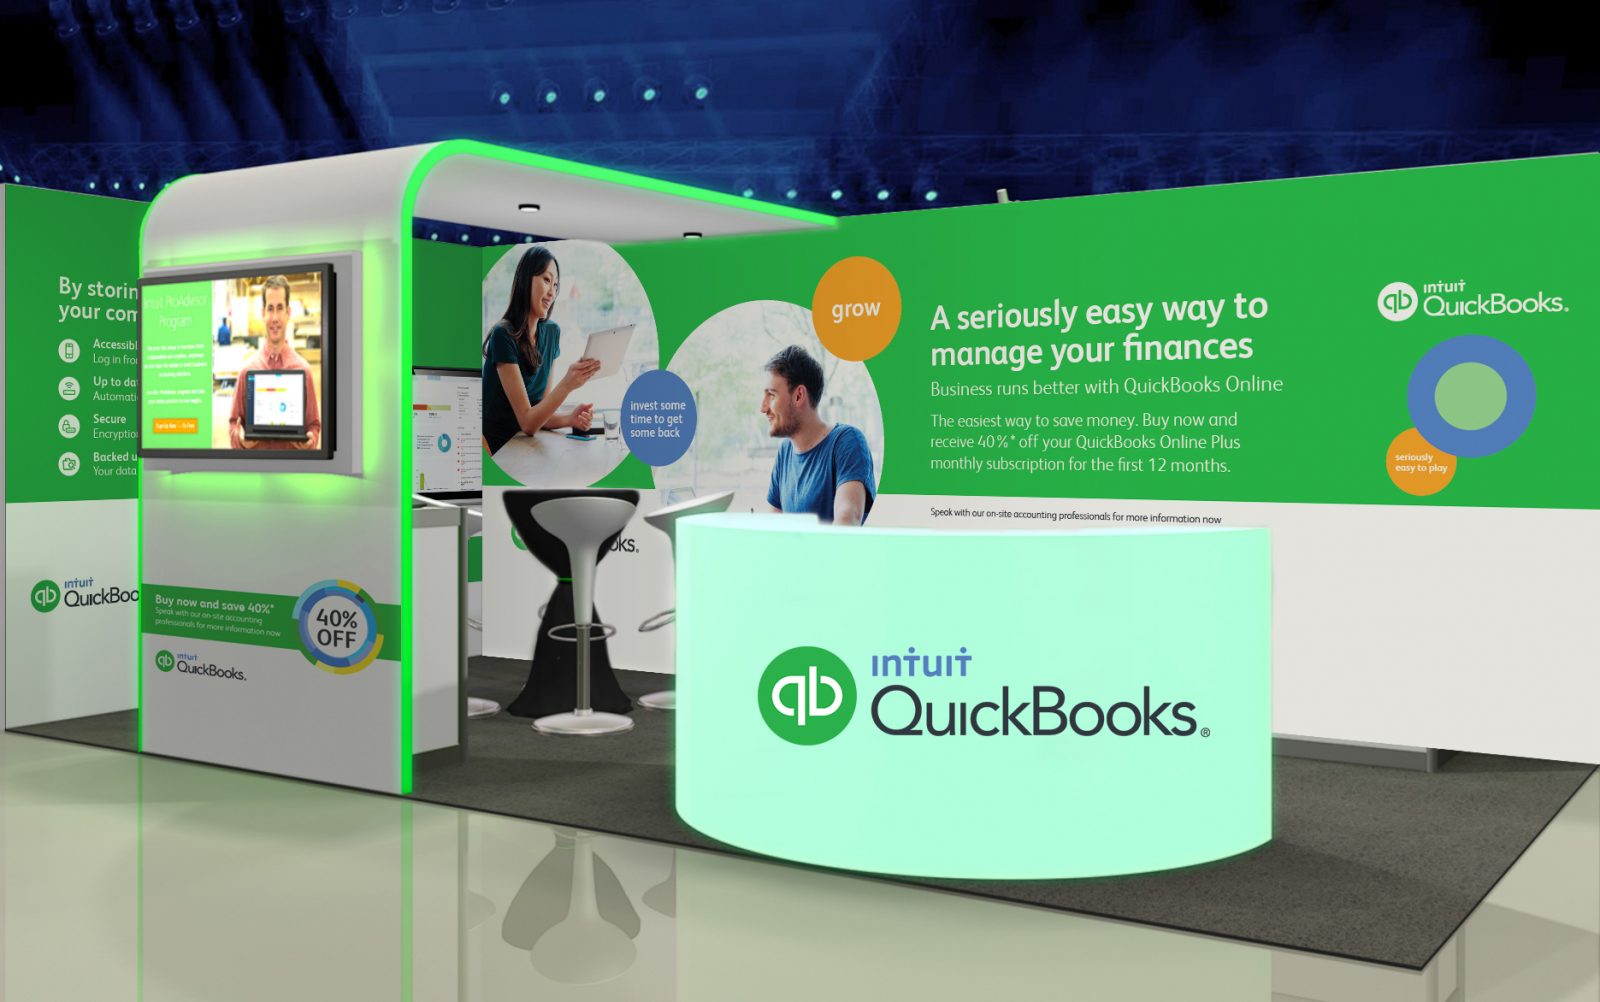 Intuit trade show booth design featuring a sleek, modern setup with vibrant blue and white colors. The booth includes large, illuminated Intuit branding, digital screens showcasing product demos, interactive kiosks, and comfortable seating areas for visitors. The space is inviting with well-organized sections for product information, consultation areas, and promotional materials. The design emphasizes innovation and customer engagement, creating an attractive, professional atmosphere.